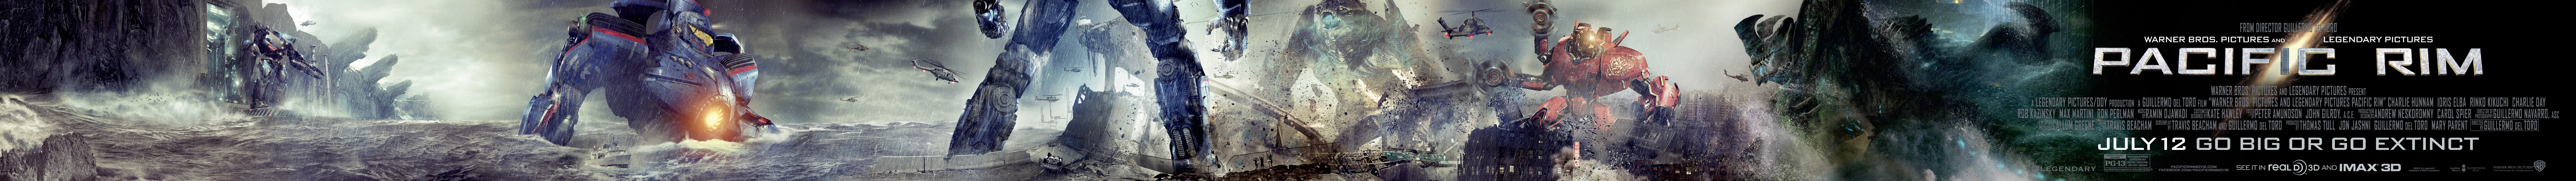 Mega Sized Movie Poster Image for Pacific Rim (#13 of 26)